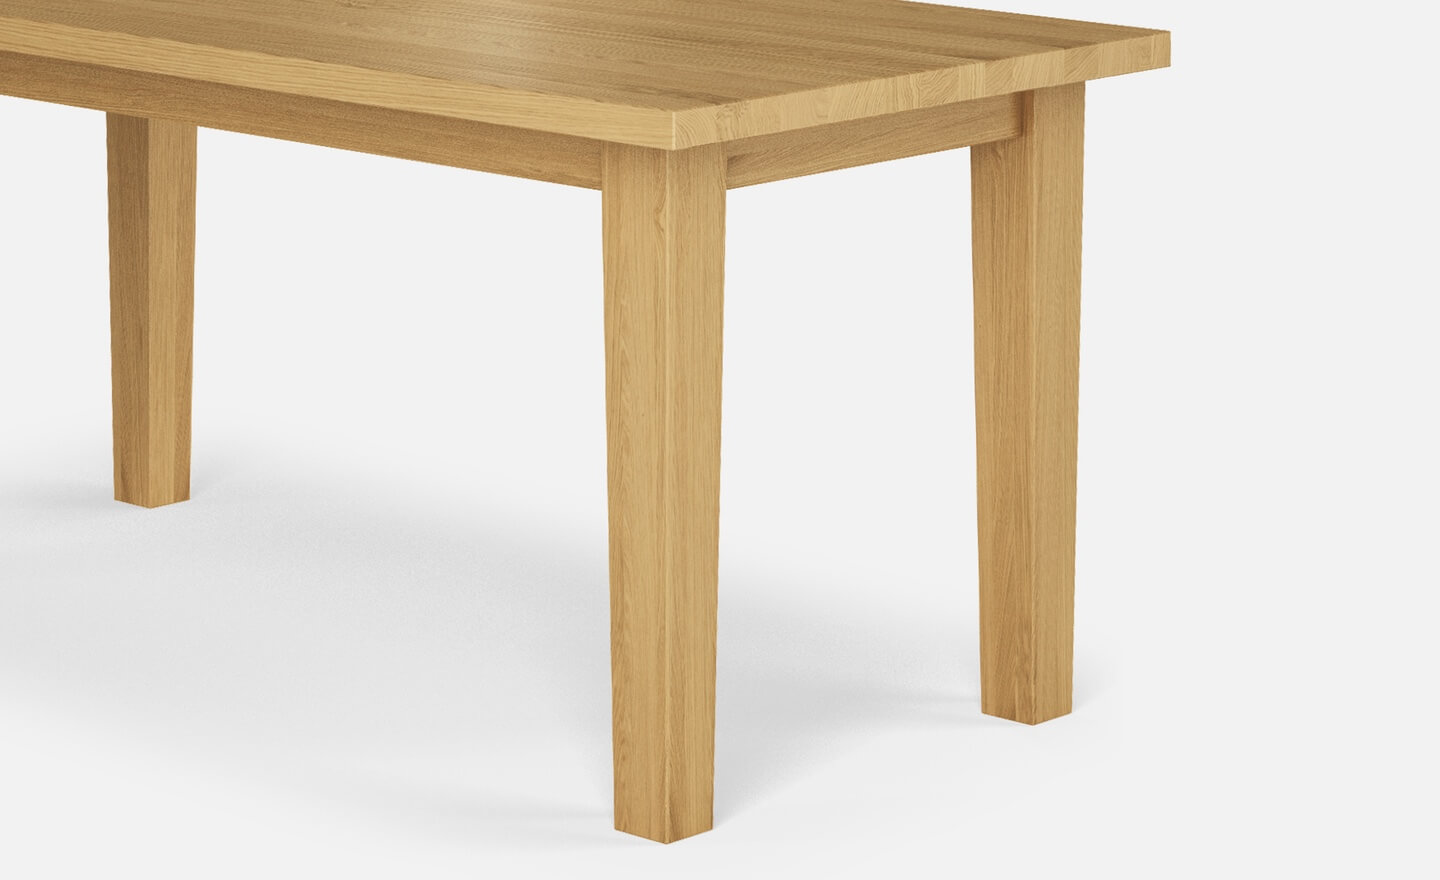 product_details_1440x880_table_legs_01